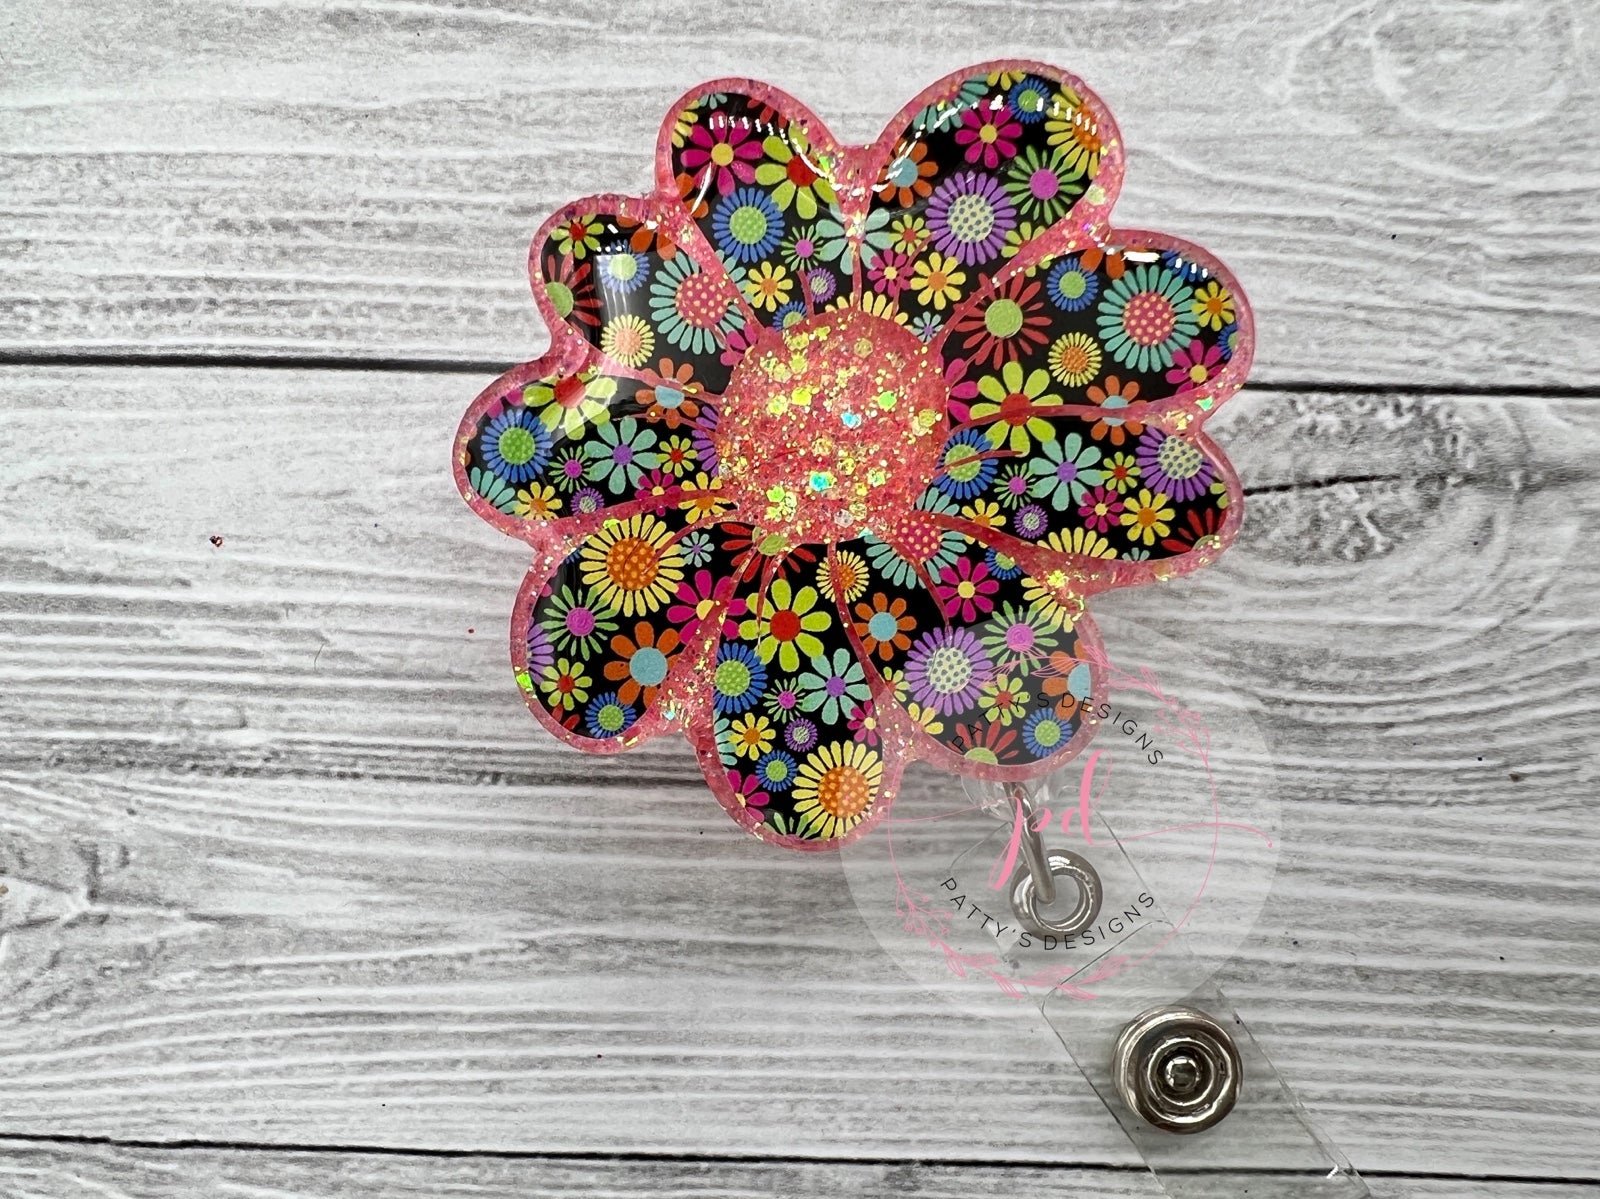 Flower Power Daisy Badge Reel (Price is Firm, No Offers) ARofSELbG